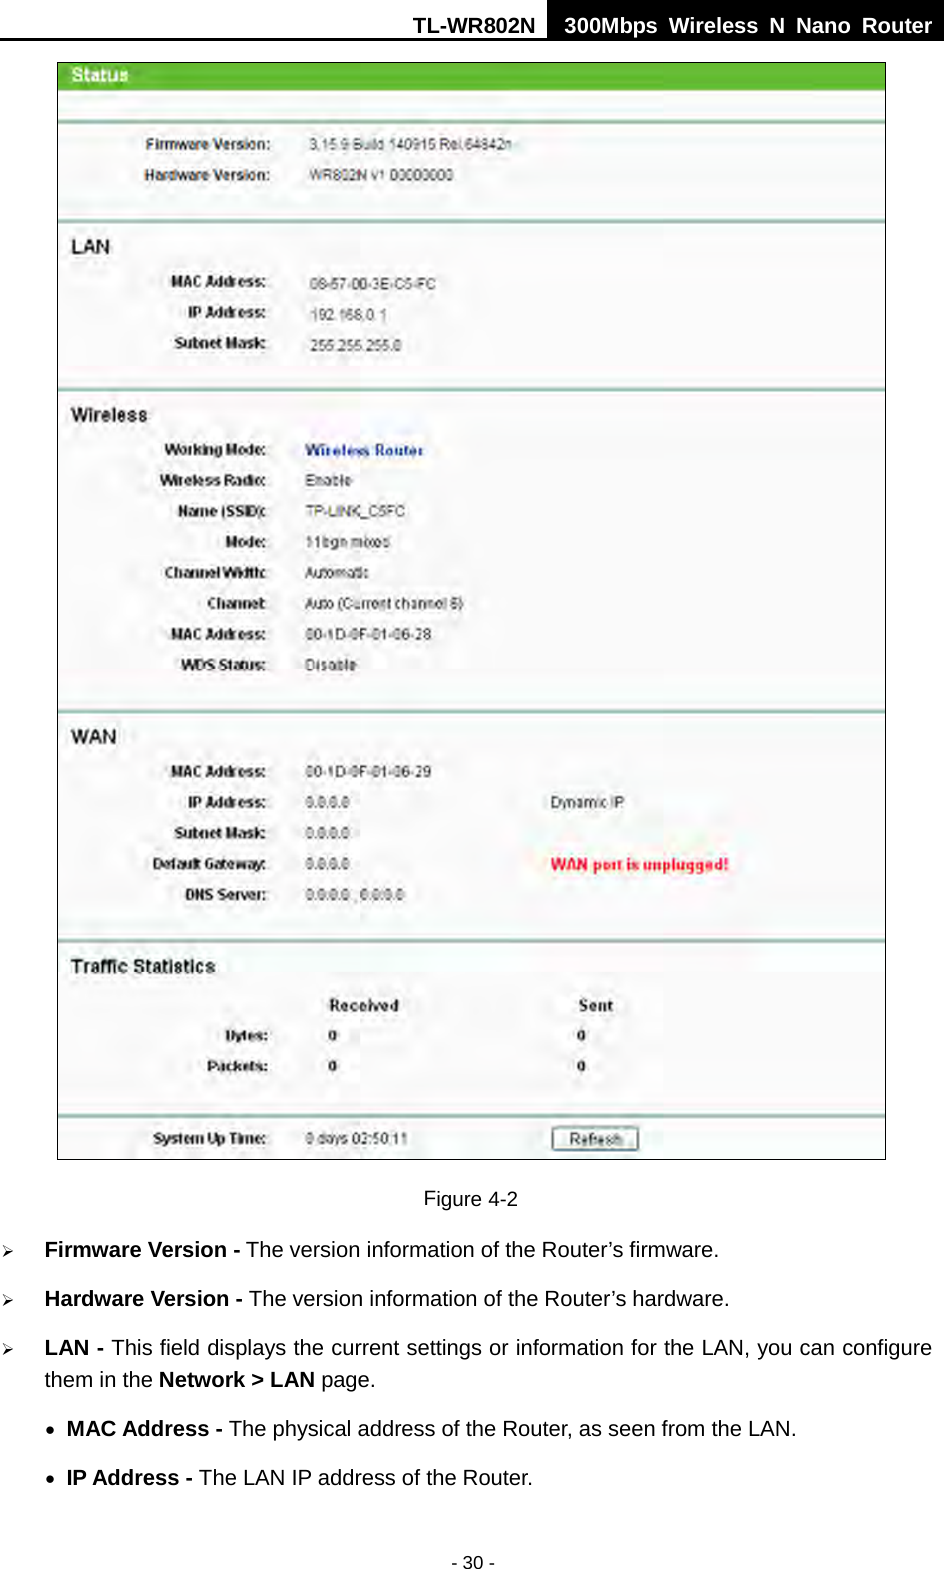 TL-WR802N  300Mbps Wireless N Nano Router   Figure 4-2  Firmware Version - The version information of the Router’s firmware.  Hardware Version - The version information of the Router’s hardware.  LAN - This field displays the current settings or information for the LAN, you can configure them in the Network &gt; LAN page.   • MAC Address - The physical address of the Router, as seen from the LAN. • IP Address - The LAN IP address of the Router. - 30 - 